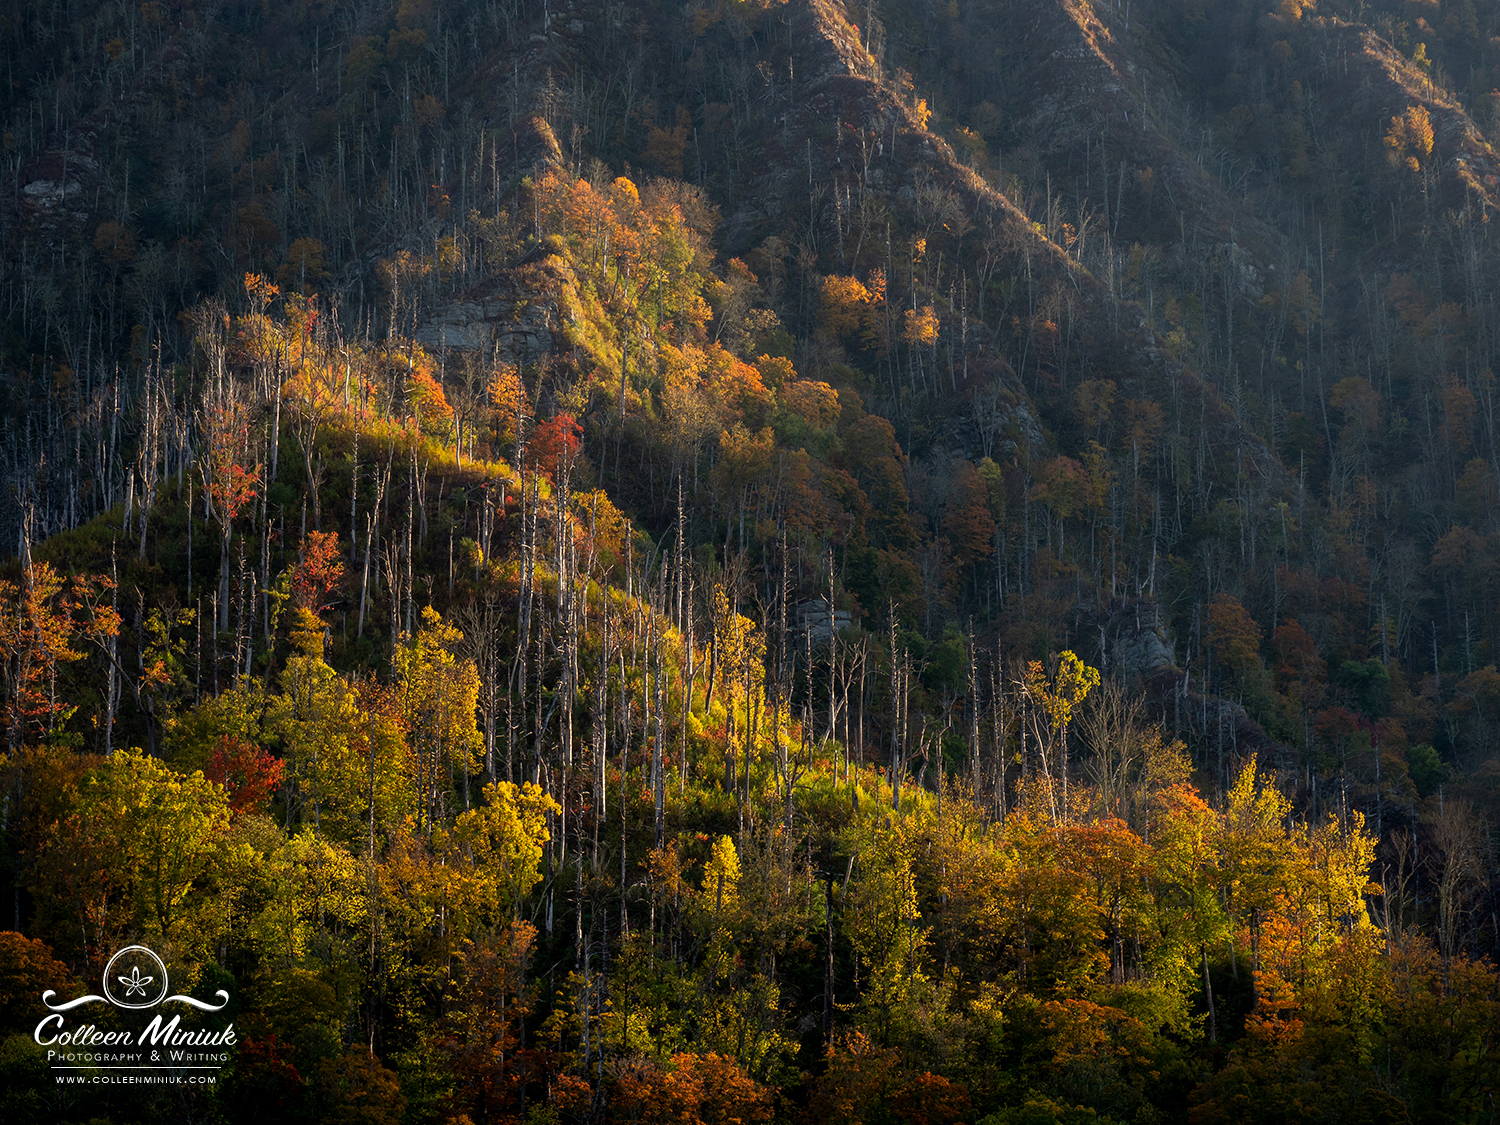 Trees displaying yellow and orange fall colors in the Great Smoky Mountains National Park, TN, USA